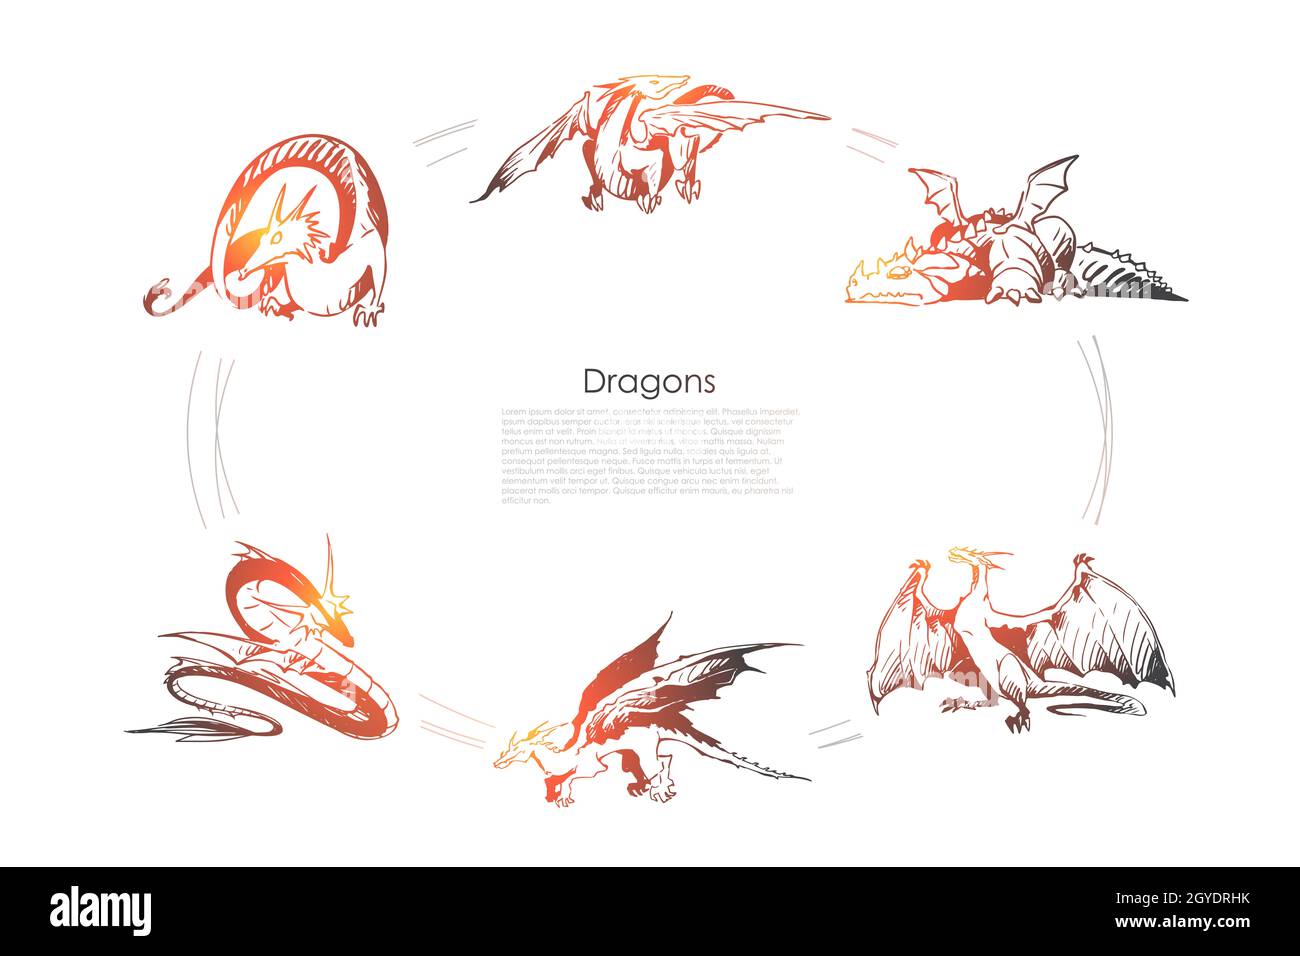 Dragons - different types of dragons vector concept set. Hand drawn sketch isolated illustration Stock Photo